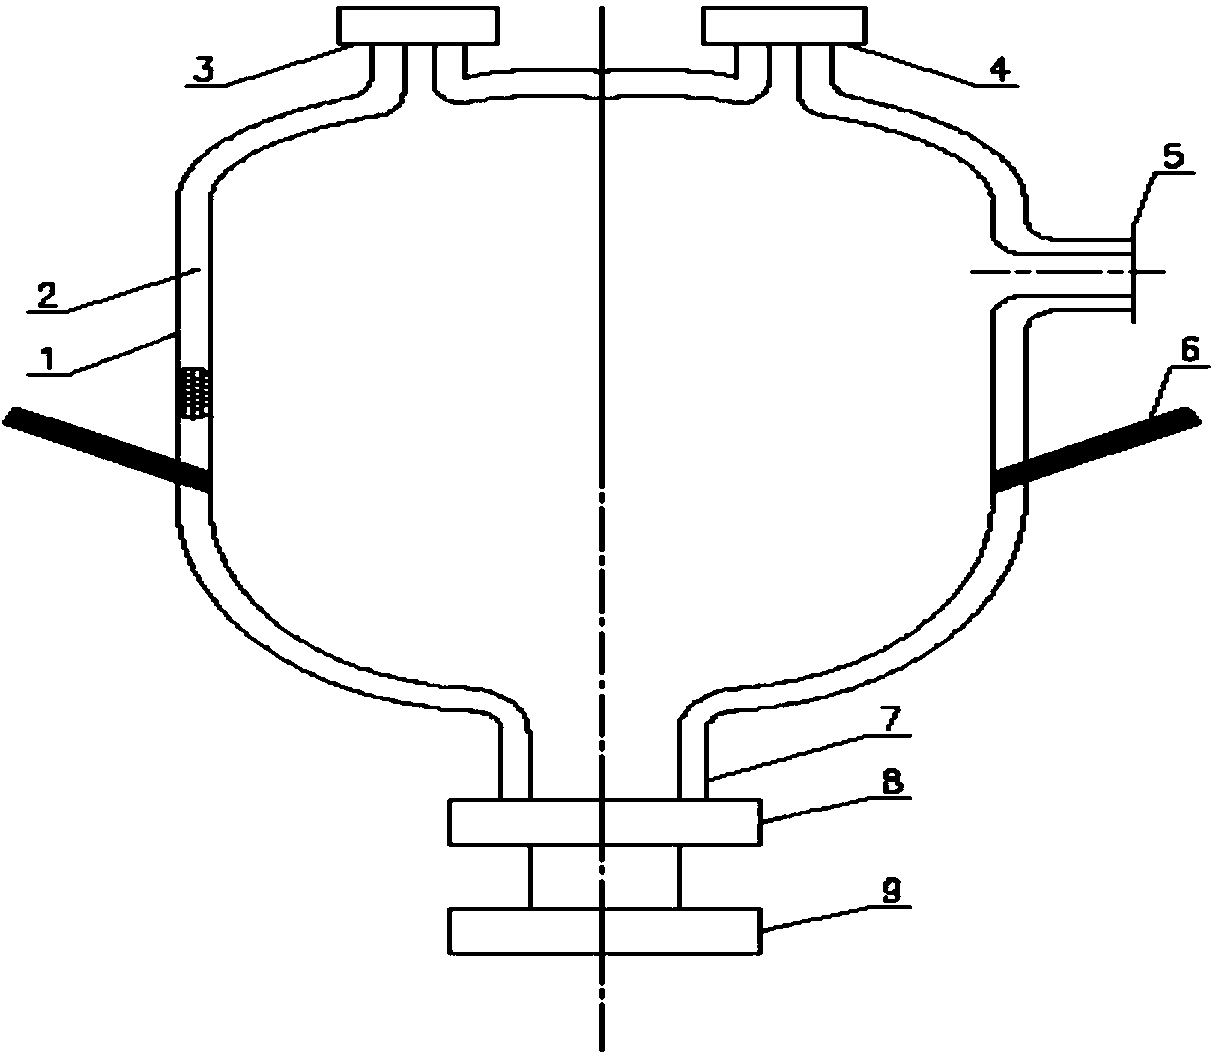 Magnesium metal smelting method and device employing plasma torch heating technology